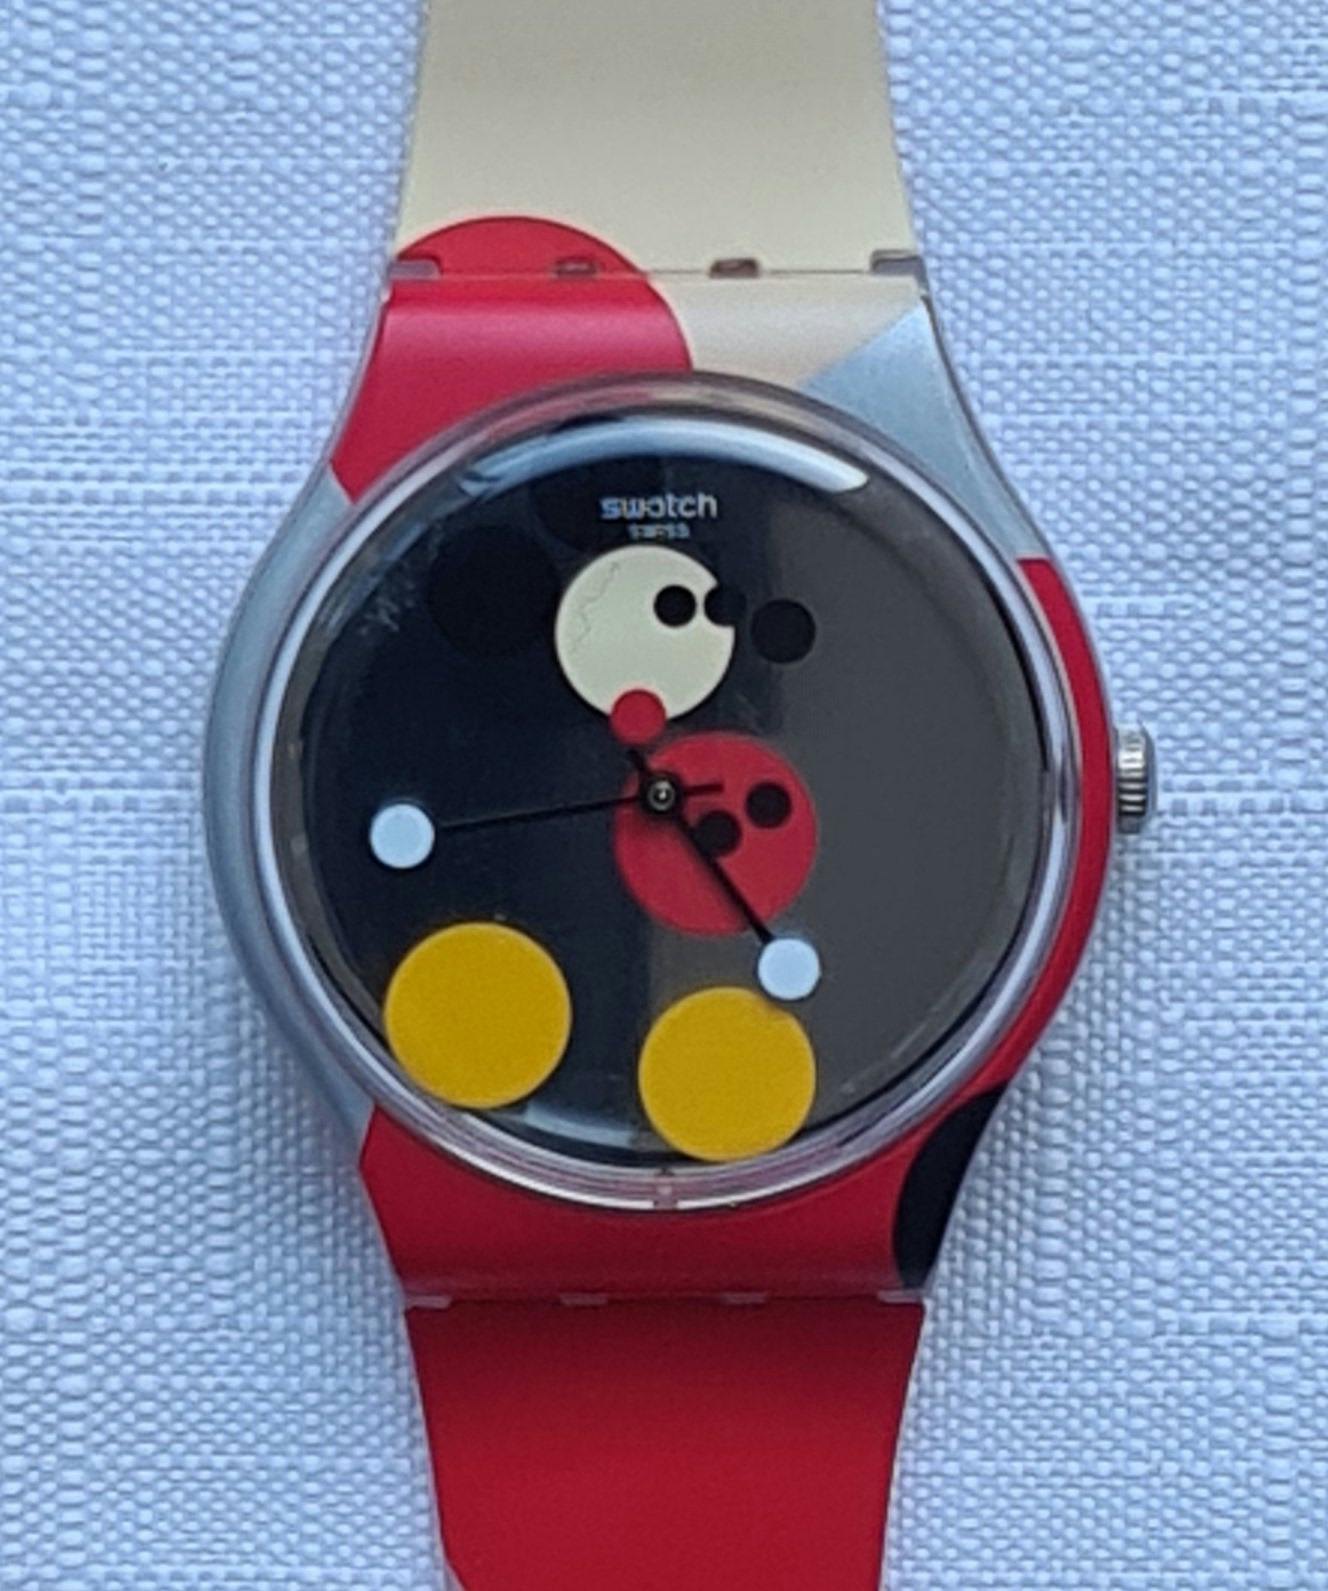 Swatch x Damien Hirst x Disney watch made in collaboration to celebrate the Swatch company's relationship with Disney.